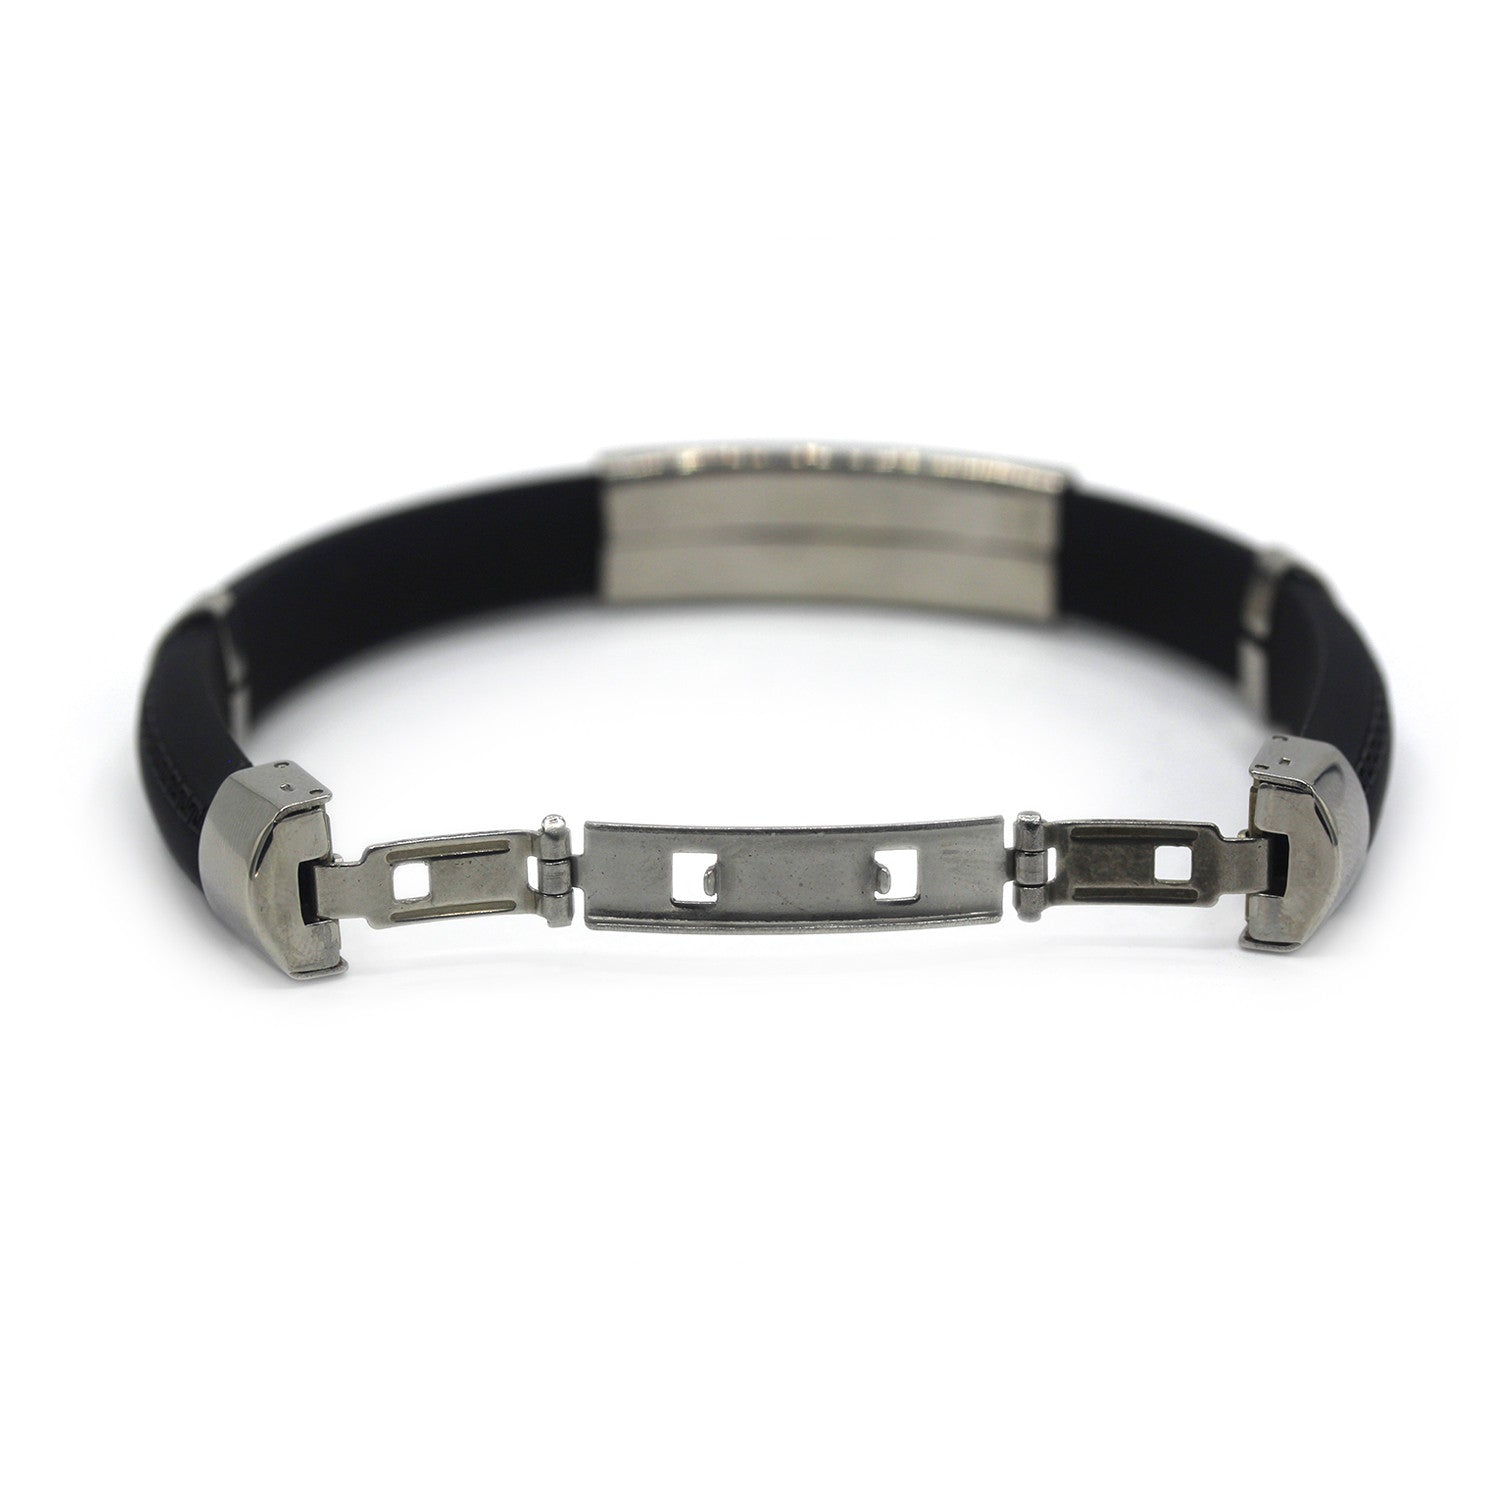 Modest Rubber Bracelet Stainless Steel Accents Dual Hinge Clasp (Silver)